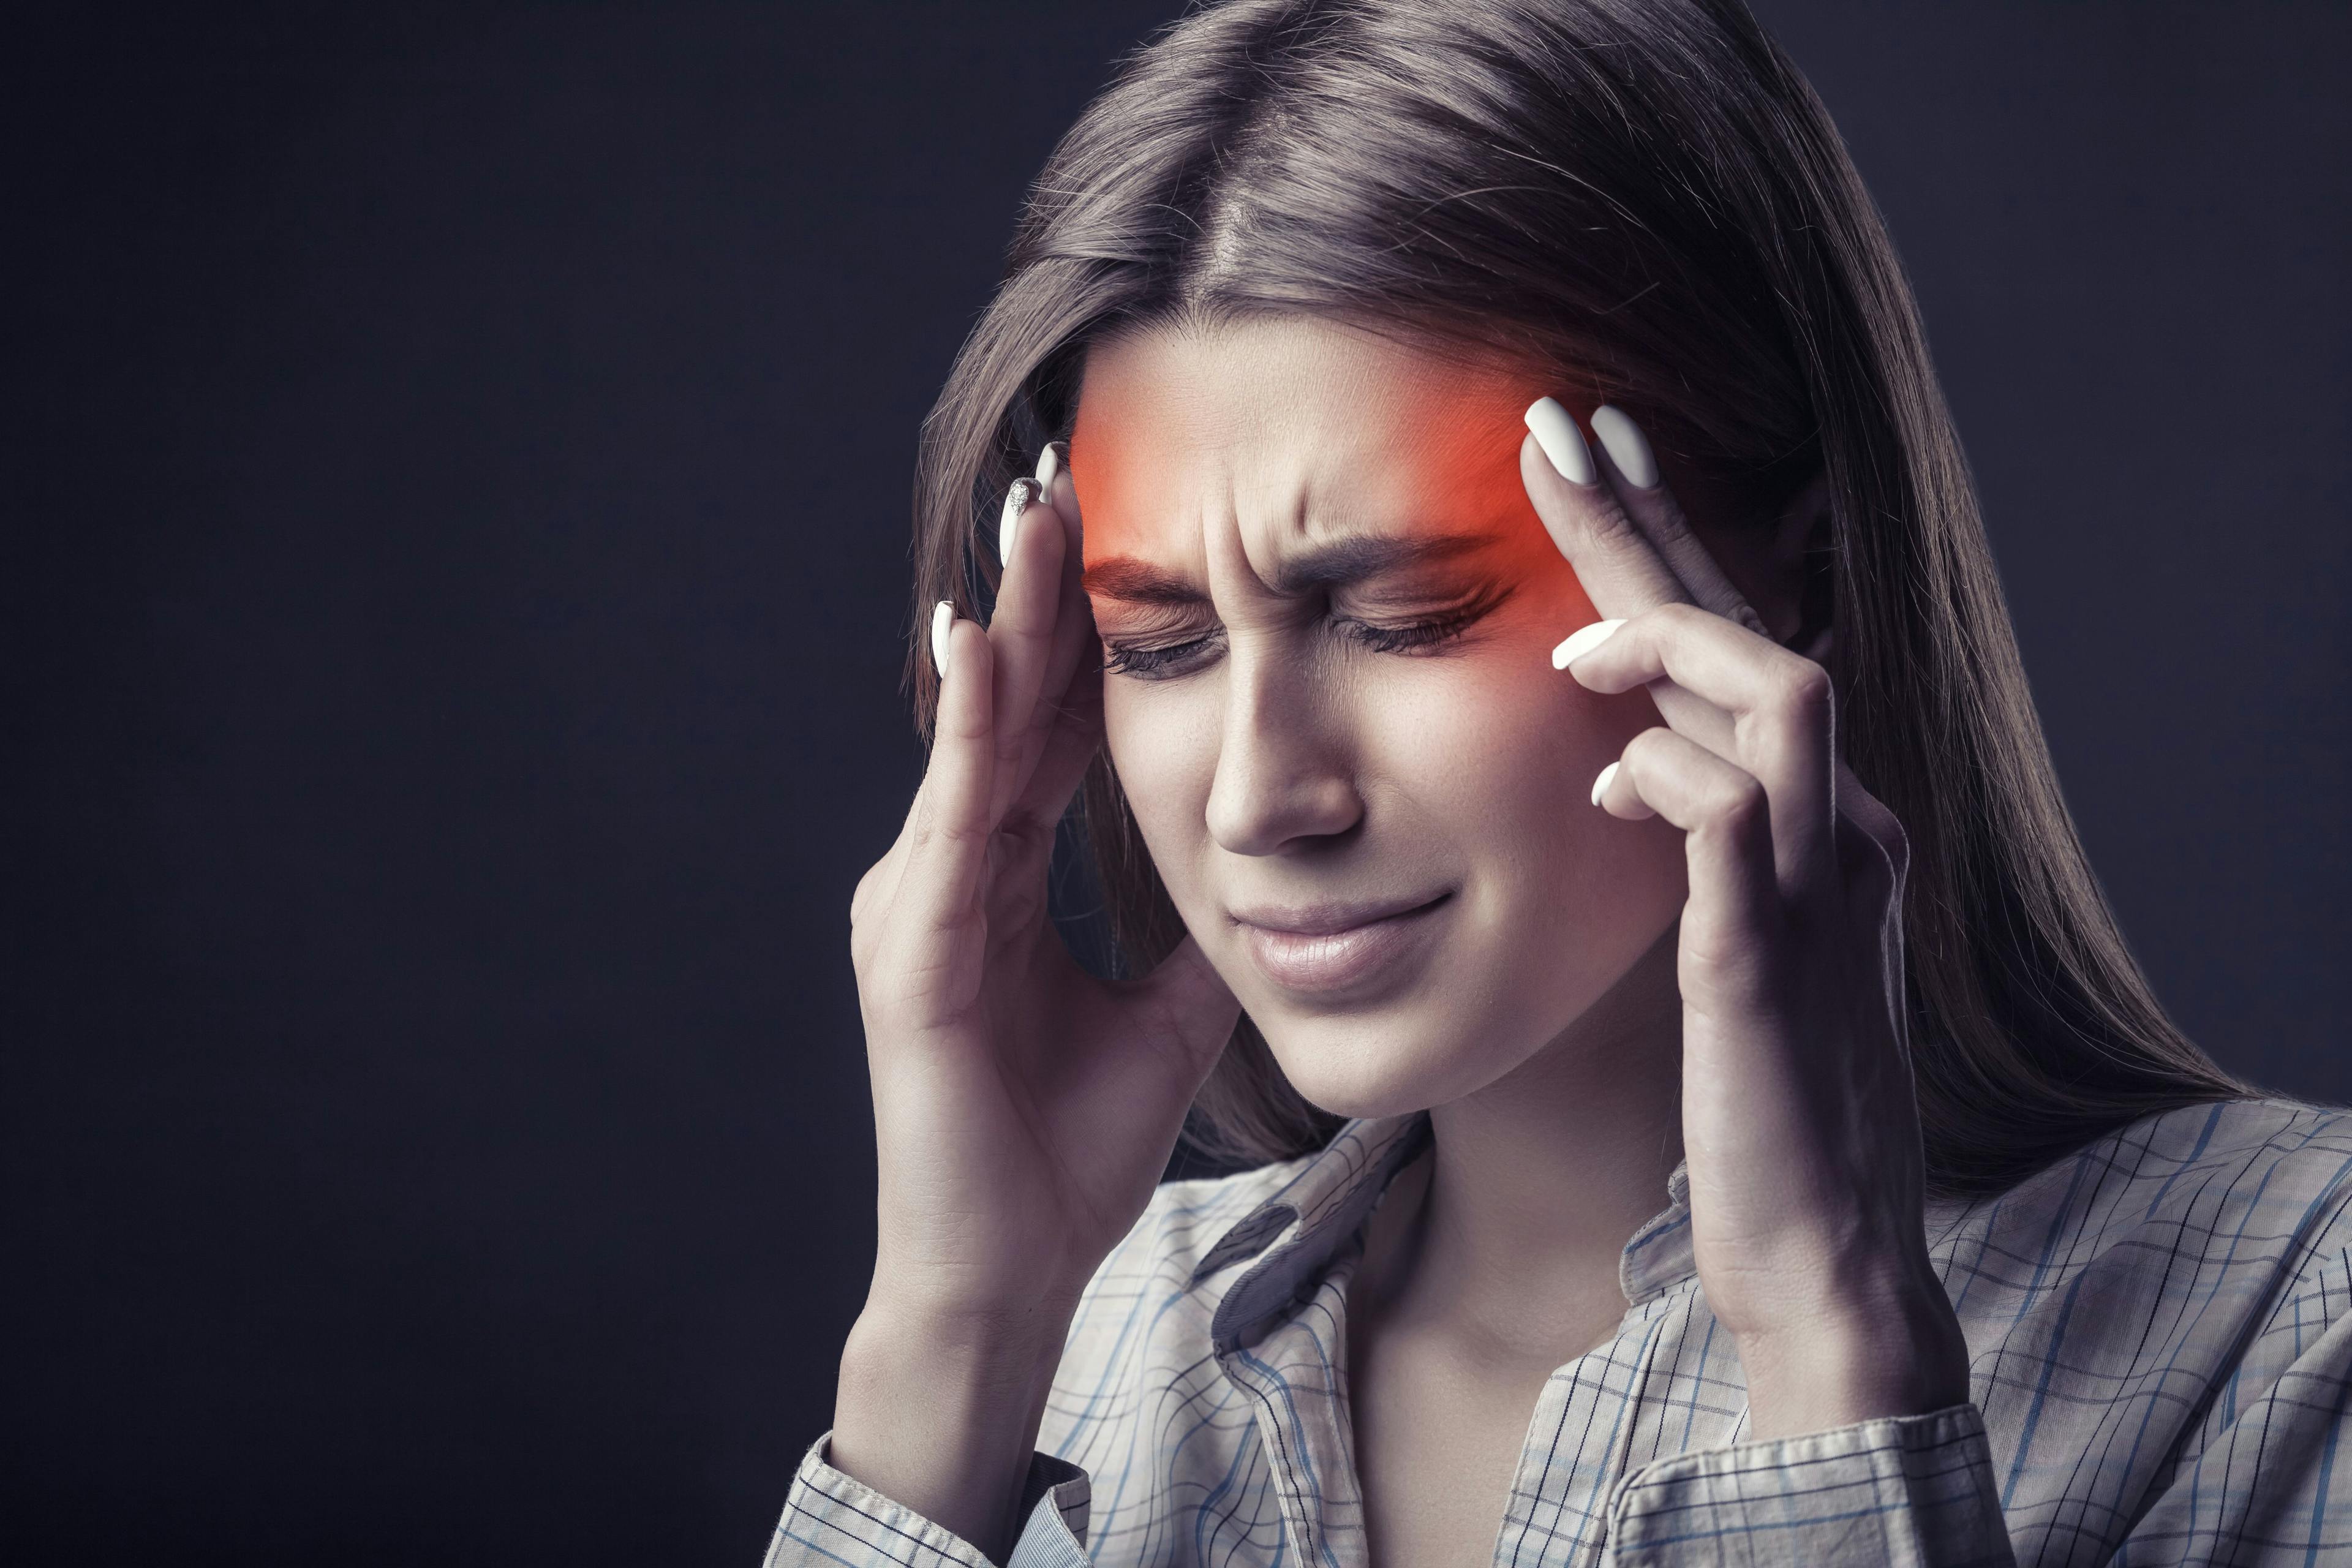 With New Indication, Nurtec ODT Is a Drug for Both Prevention and Treatment of Migraine